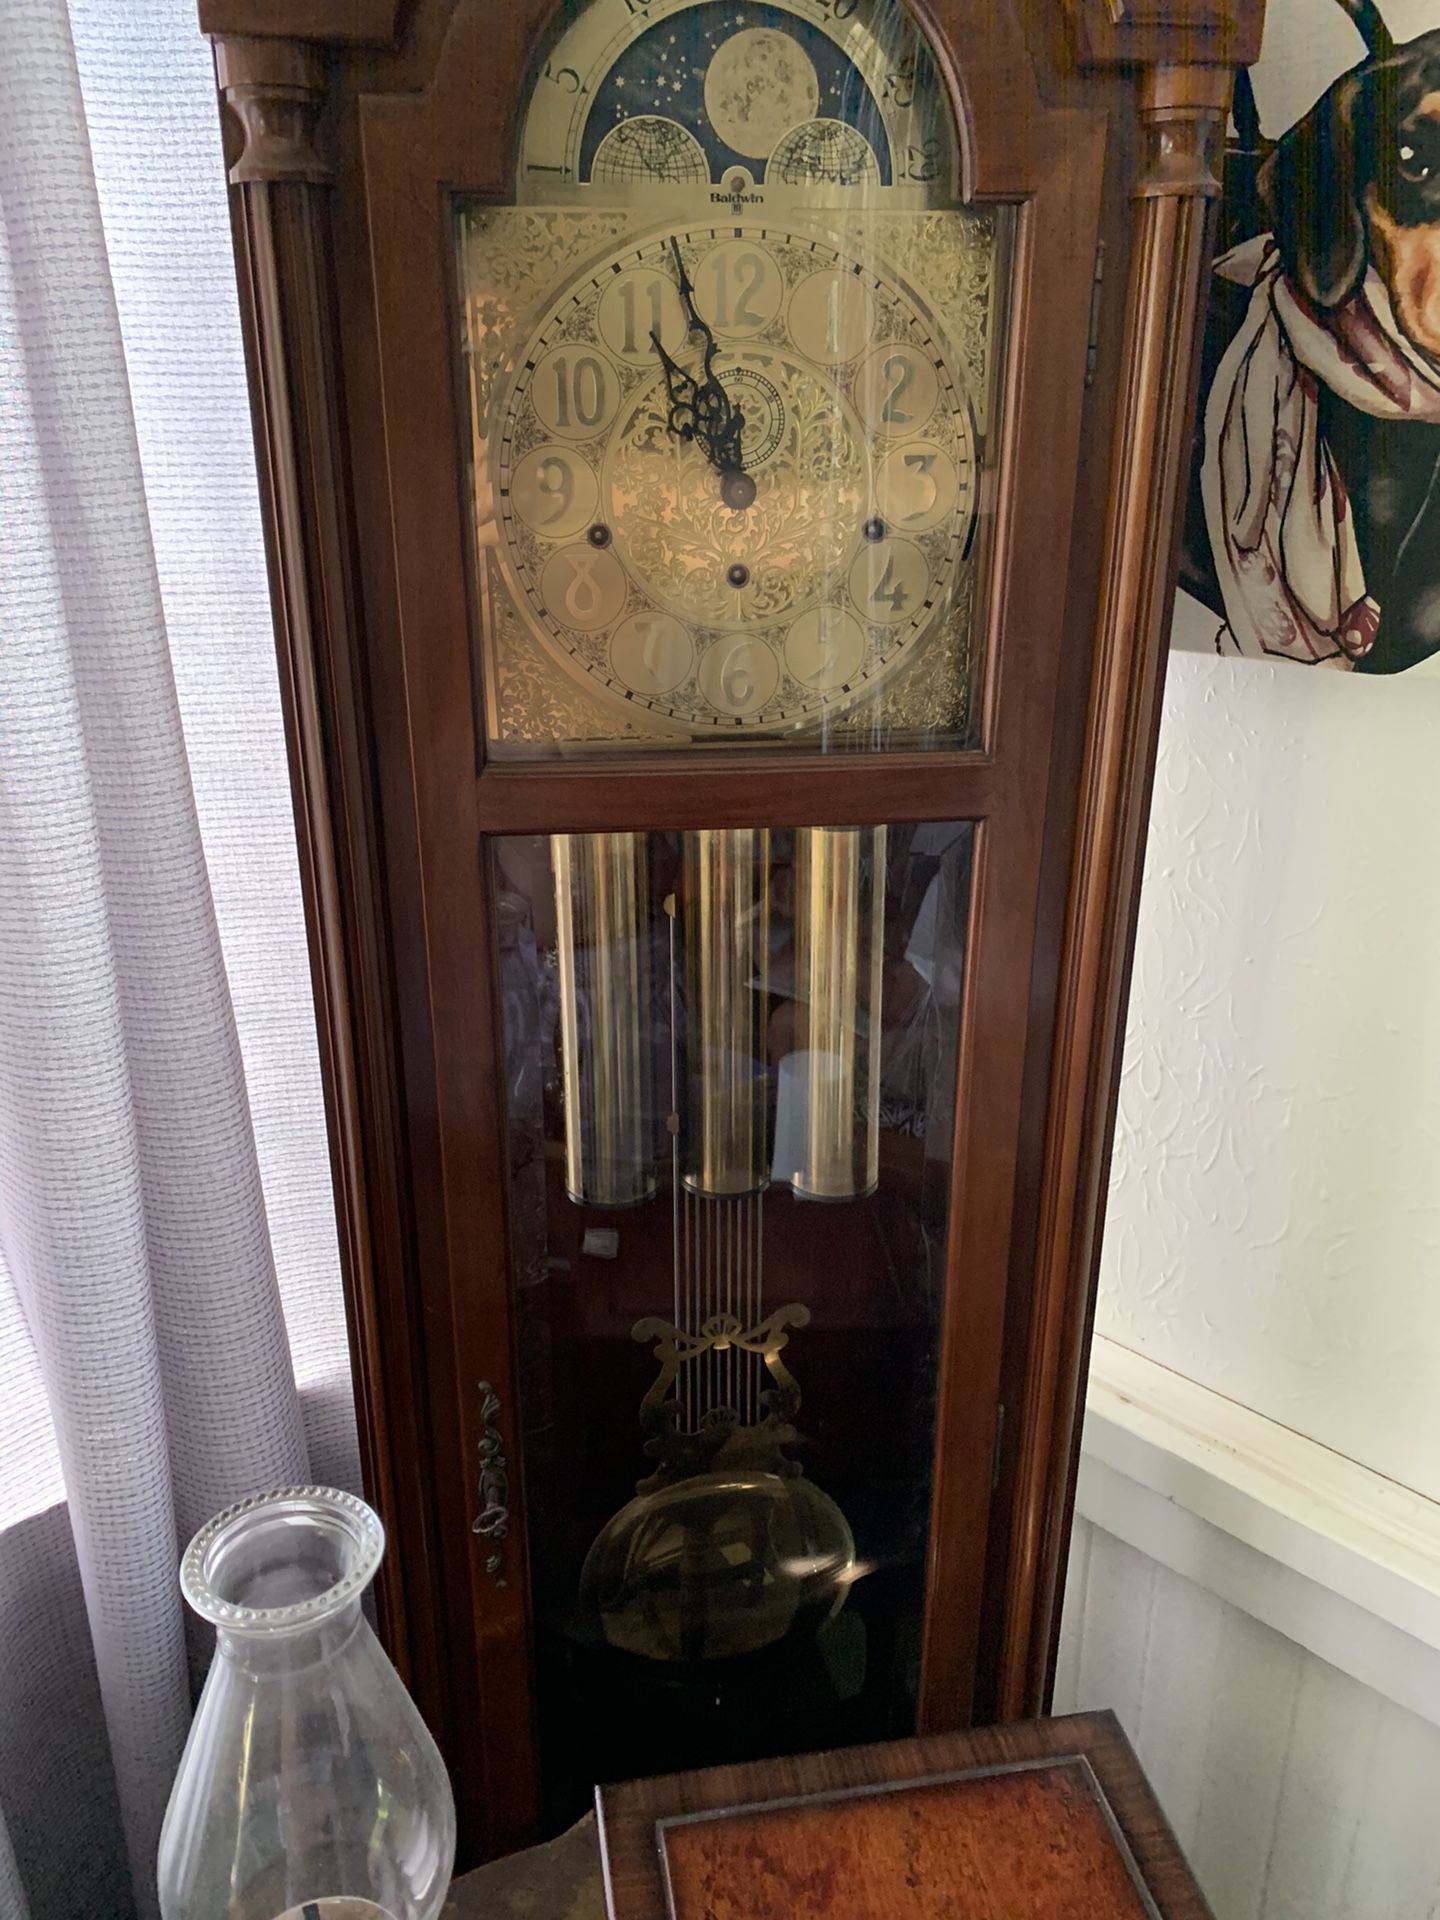 Grandfathers clock about 7’ high